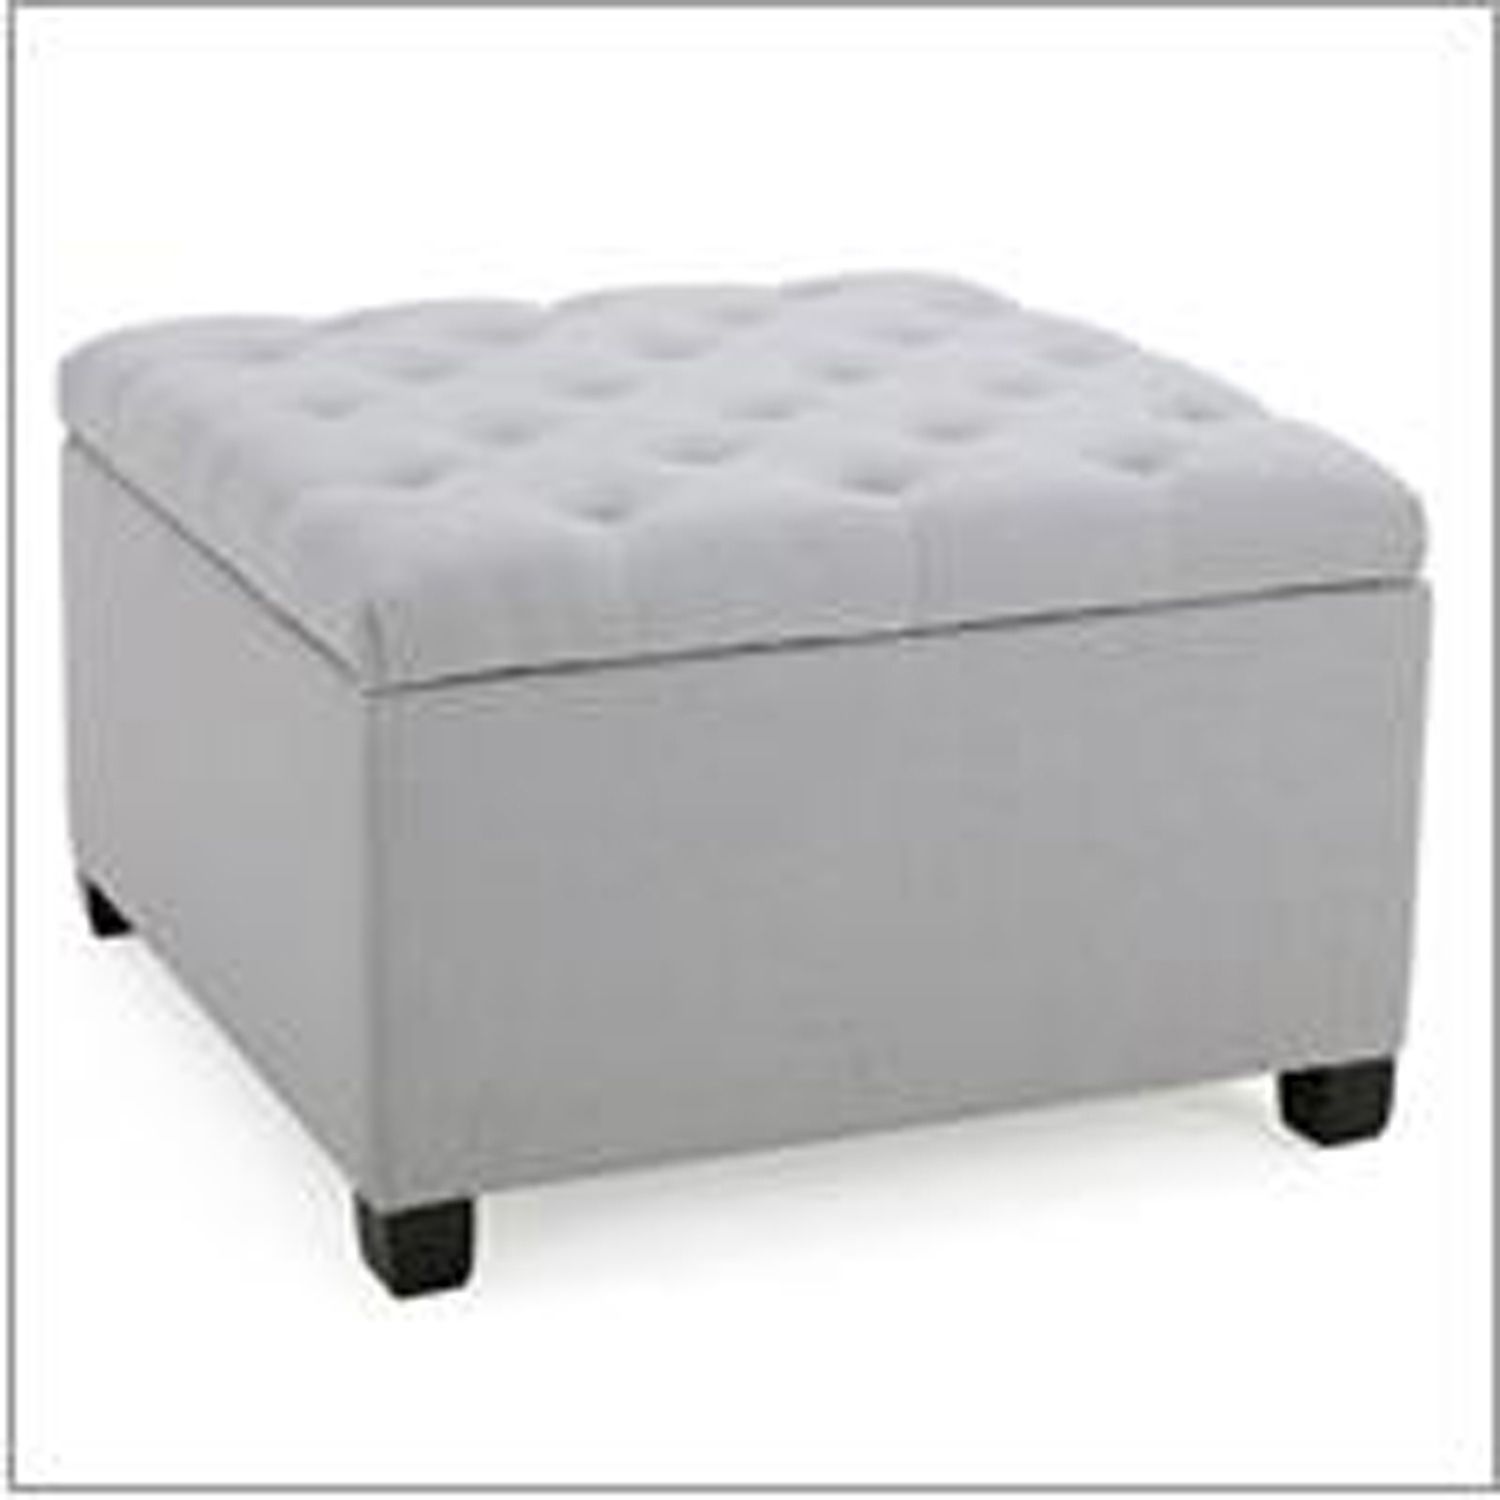 Kendall Light Gray Fabric Storage Ottoman – Pier1 Inside Popular Beige And Light Gray Fabric Pouf Ottomans (View 5 of 10)